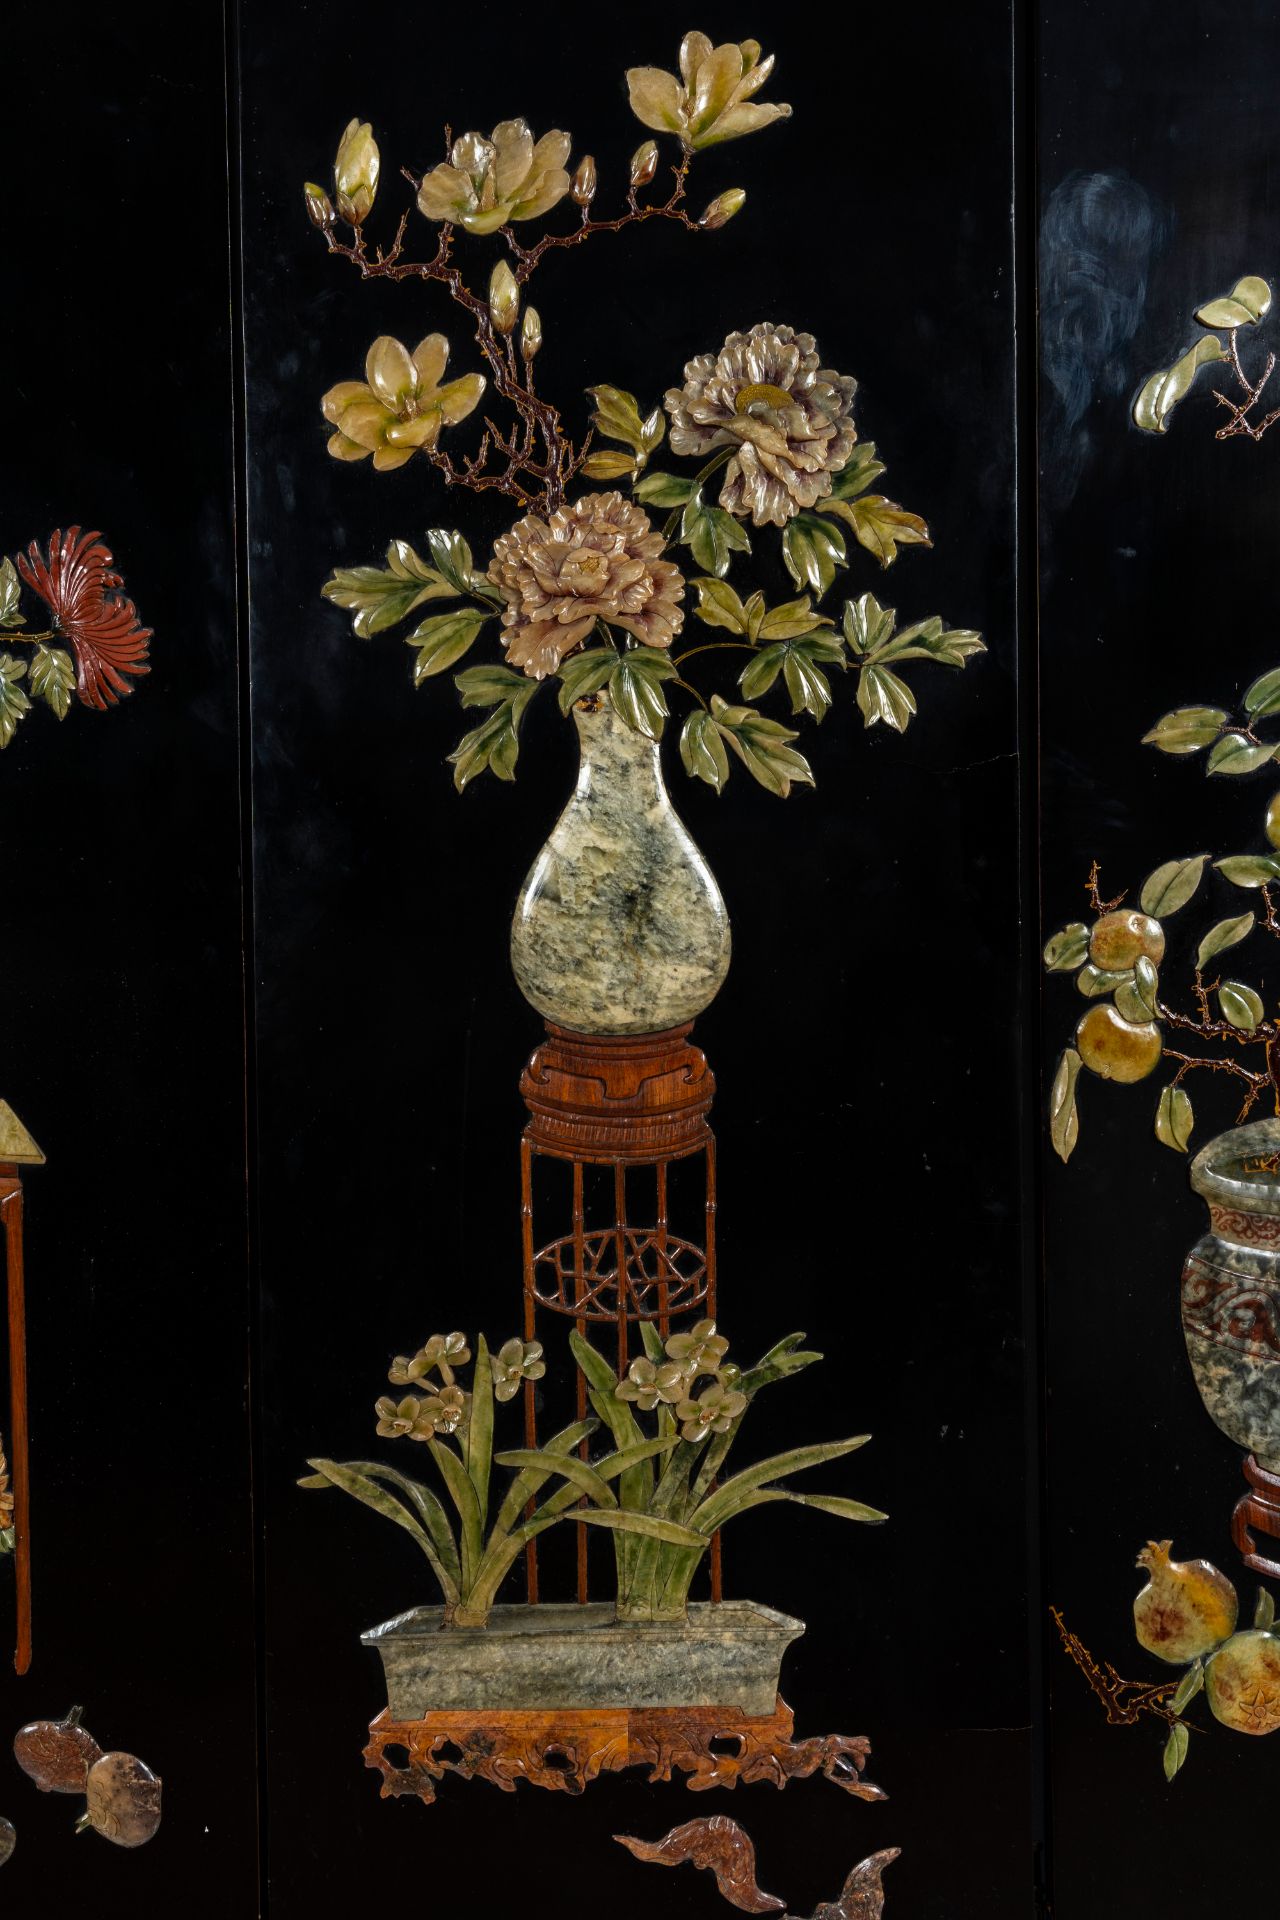 A Chinese four-panel room divider in precious stone-embellished lacquered wood, 20th C. - Image 6 of 9